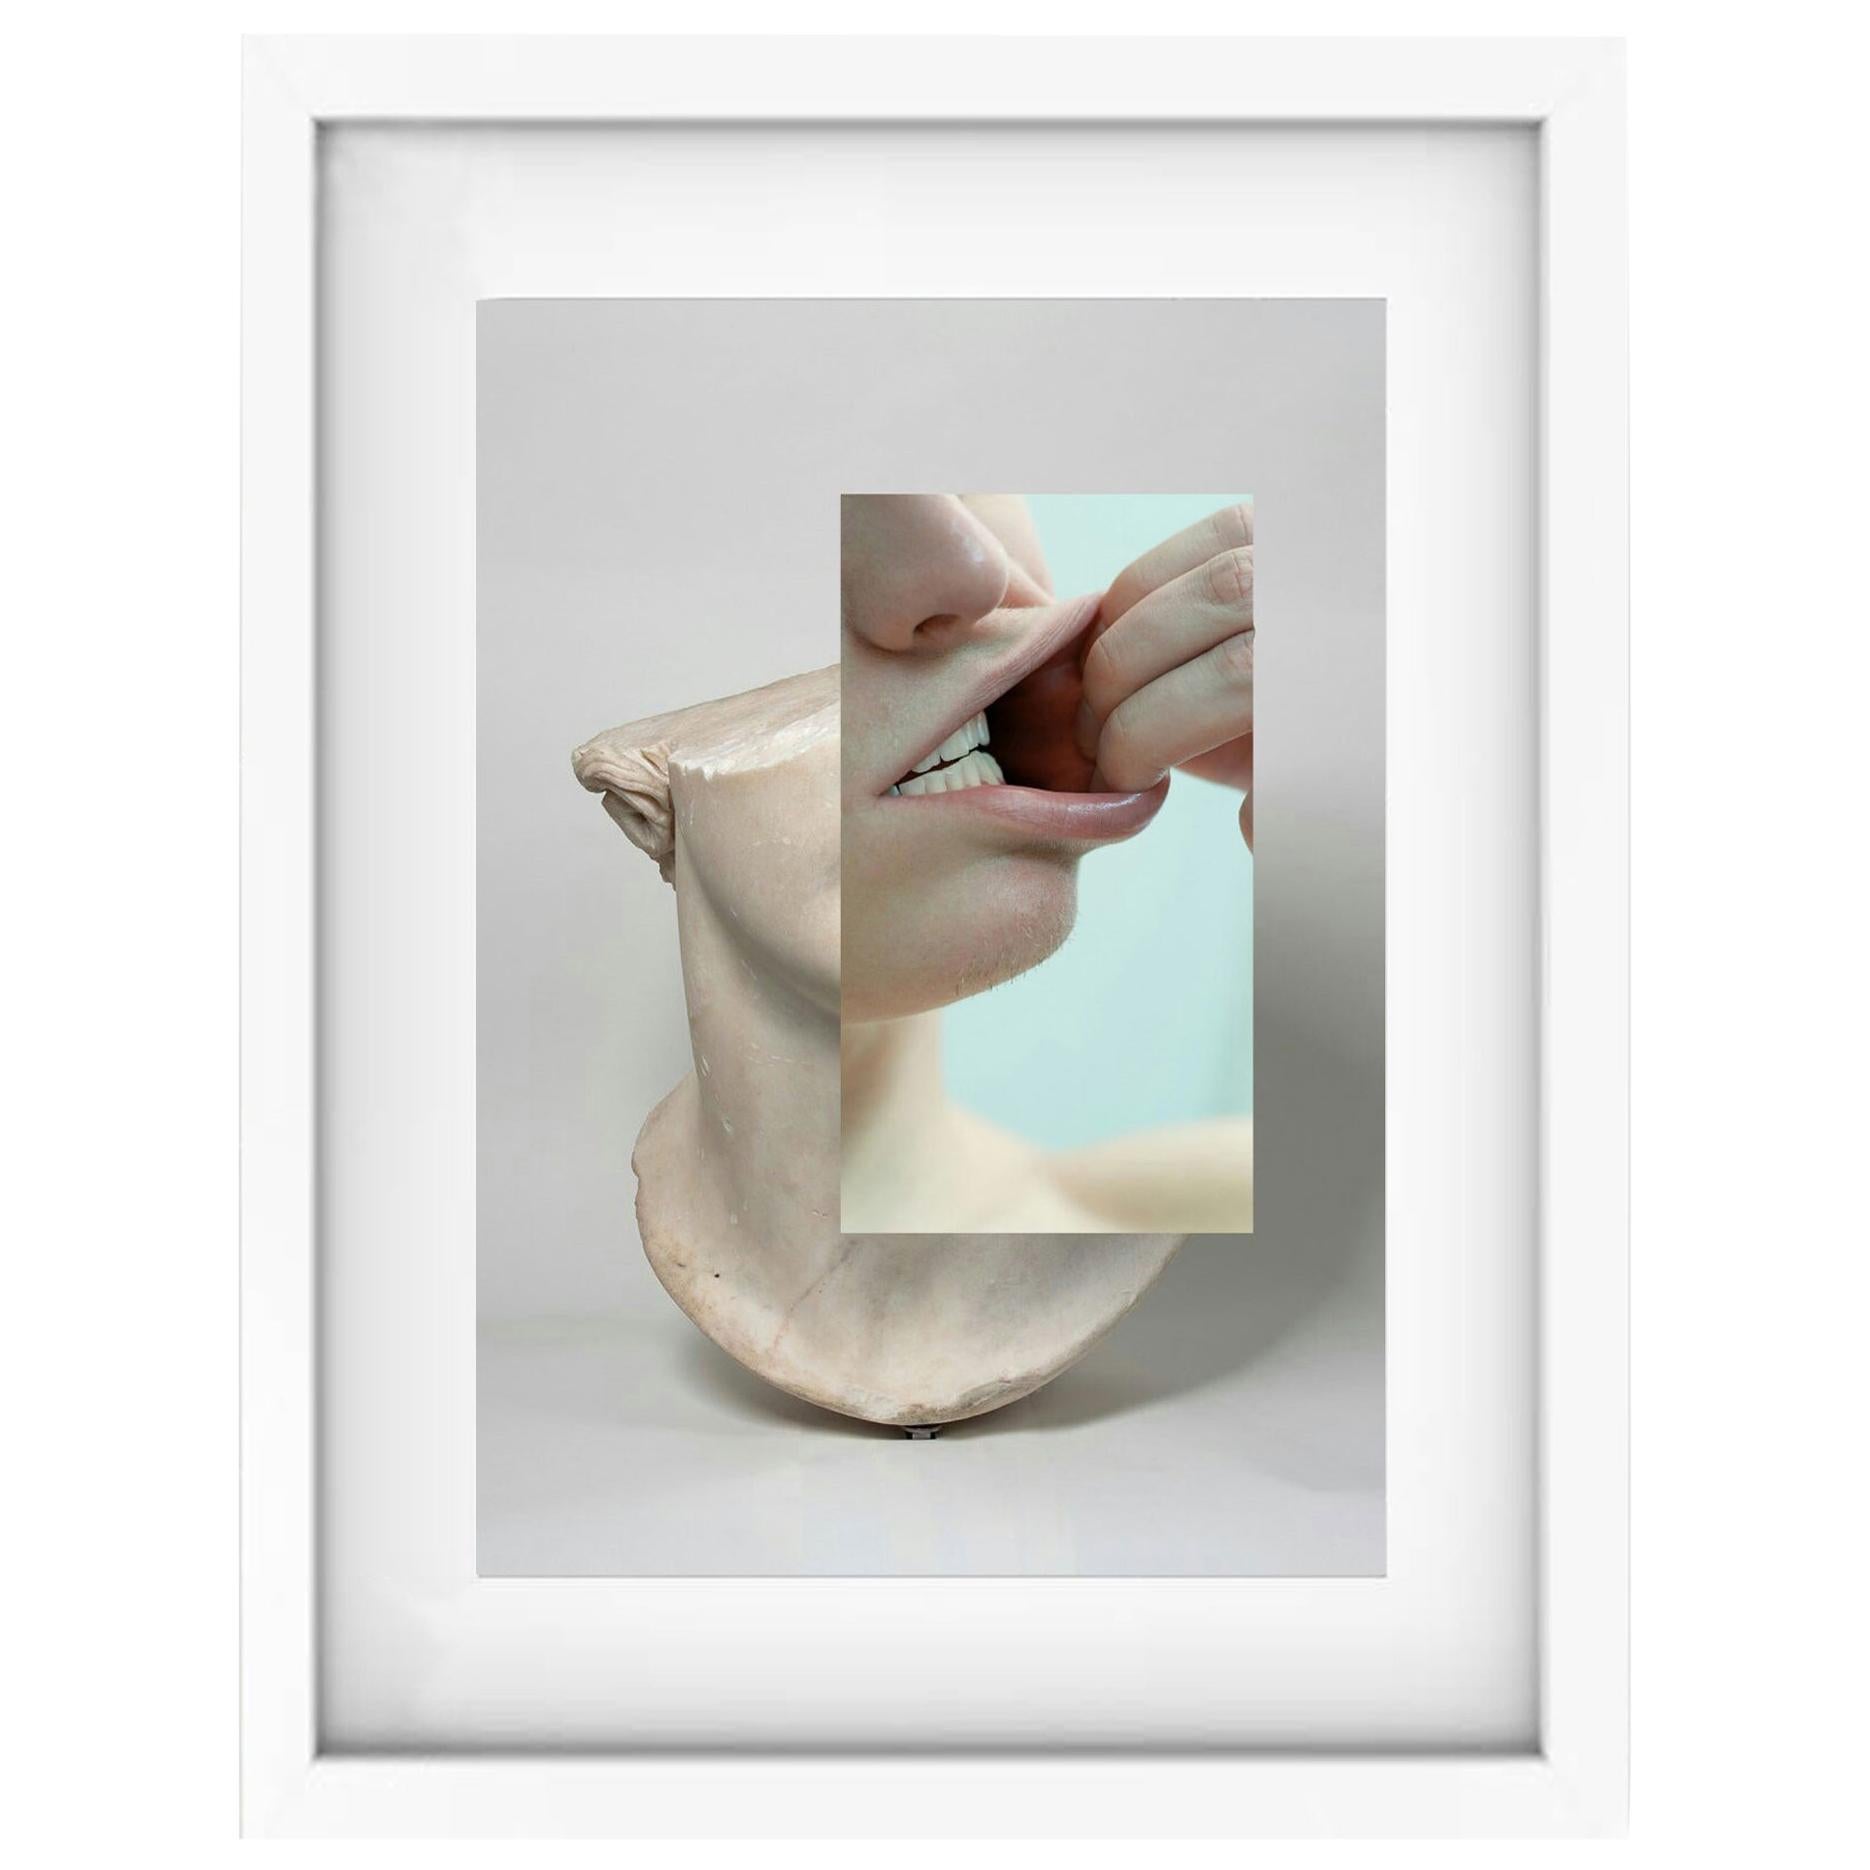 Classic Sculpture Mouth Naro Pinosa, "Untitled" Digital Collage, Spain, 2019